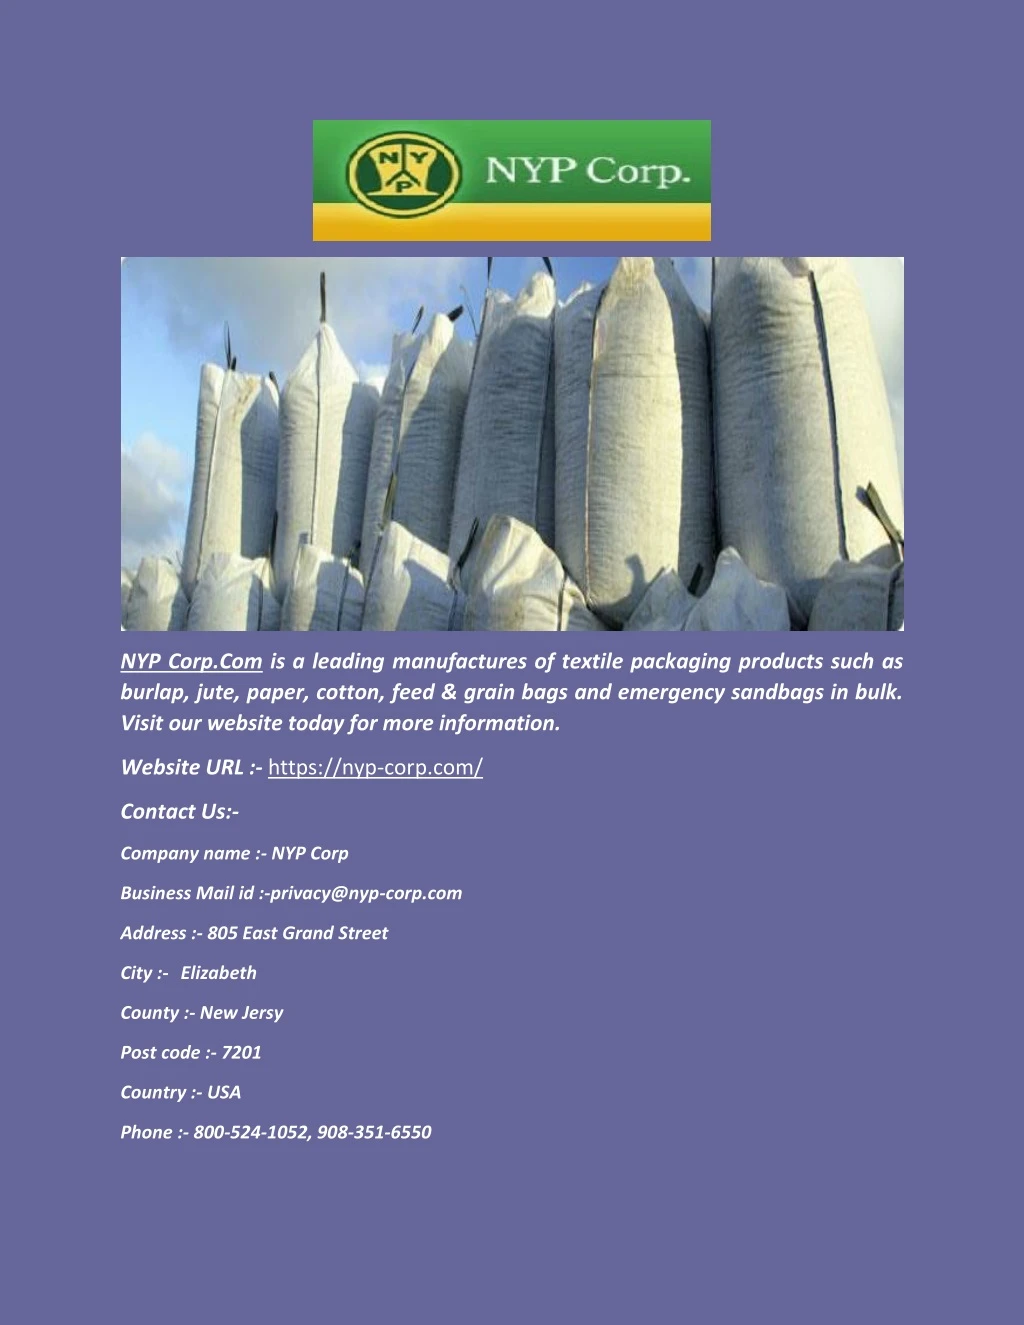 nyp corp com is a leading manufactures of textile